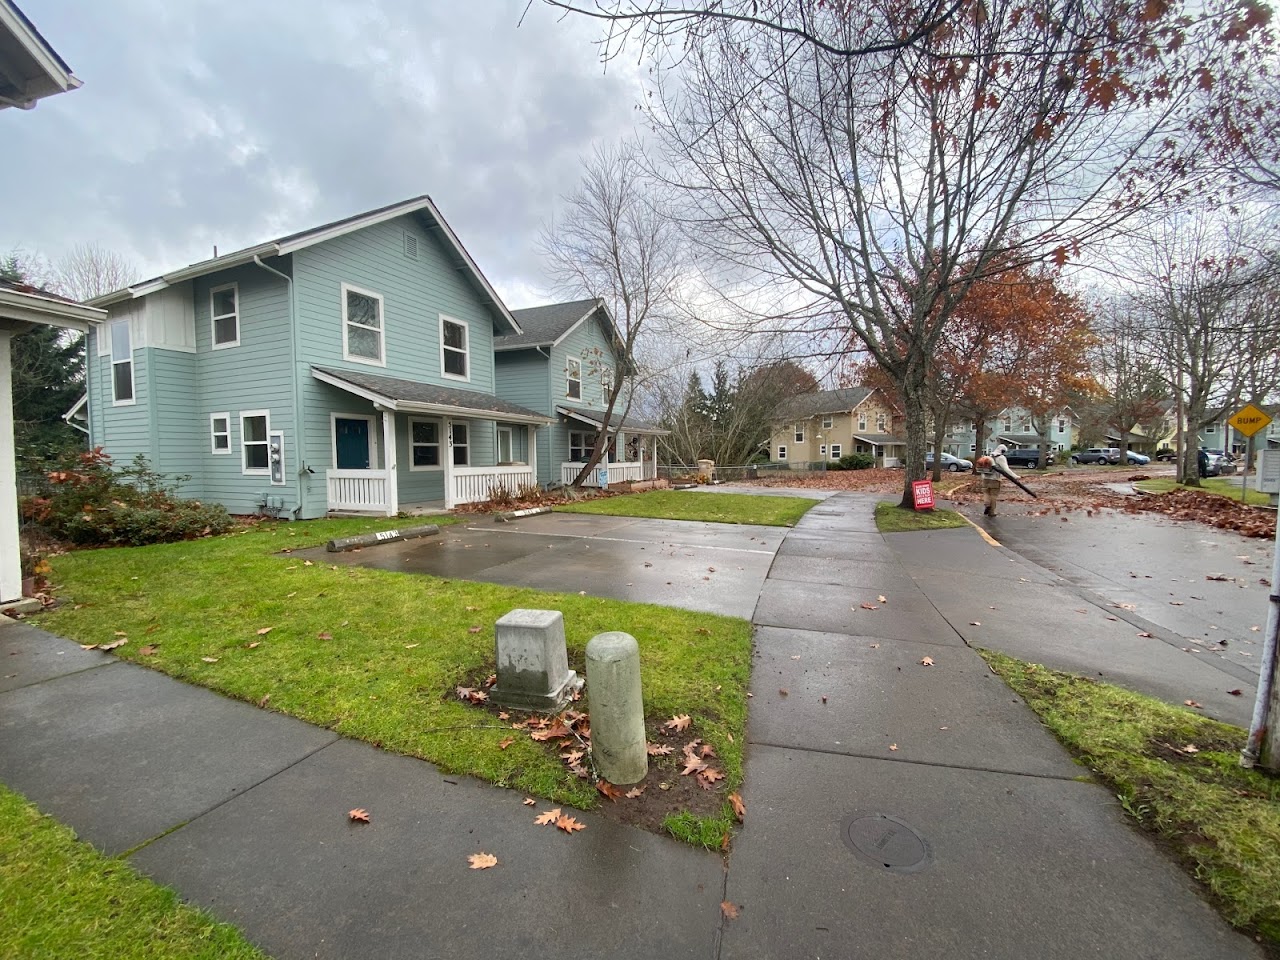 Photo of CAMAS COMMONS. Affordable housing located at 5140 SW MEADOW FLOWER DR CORVALLIS, OR 97333